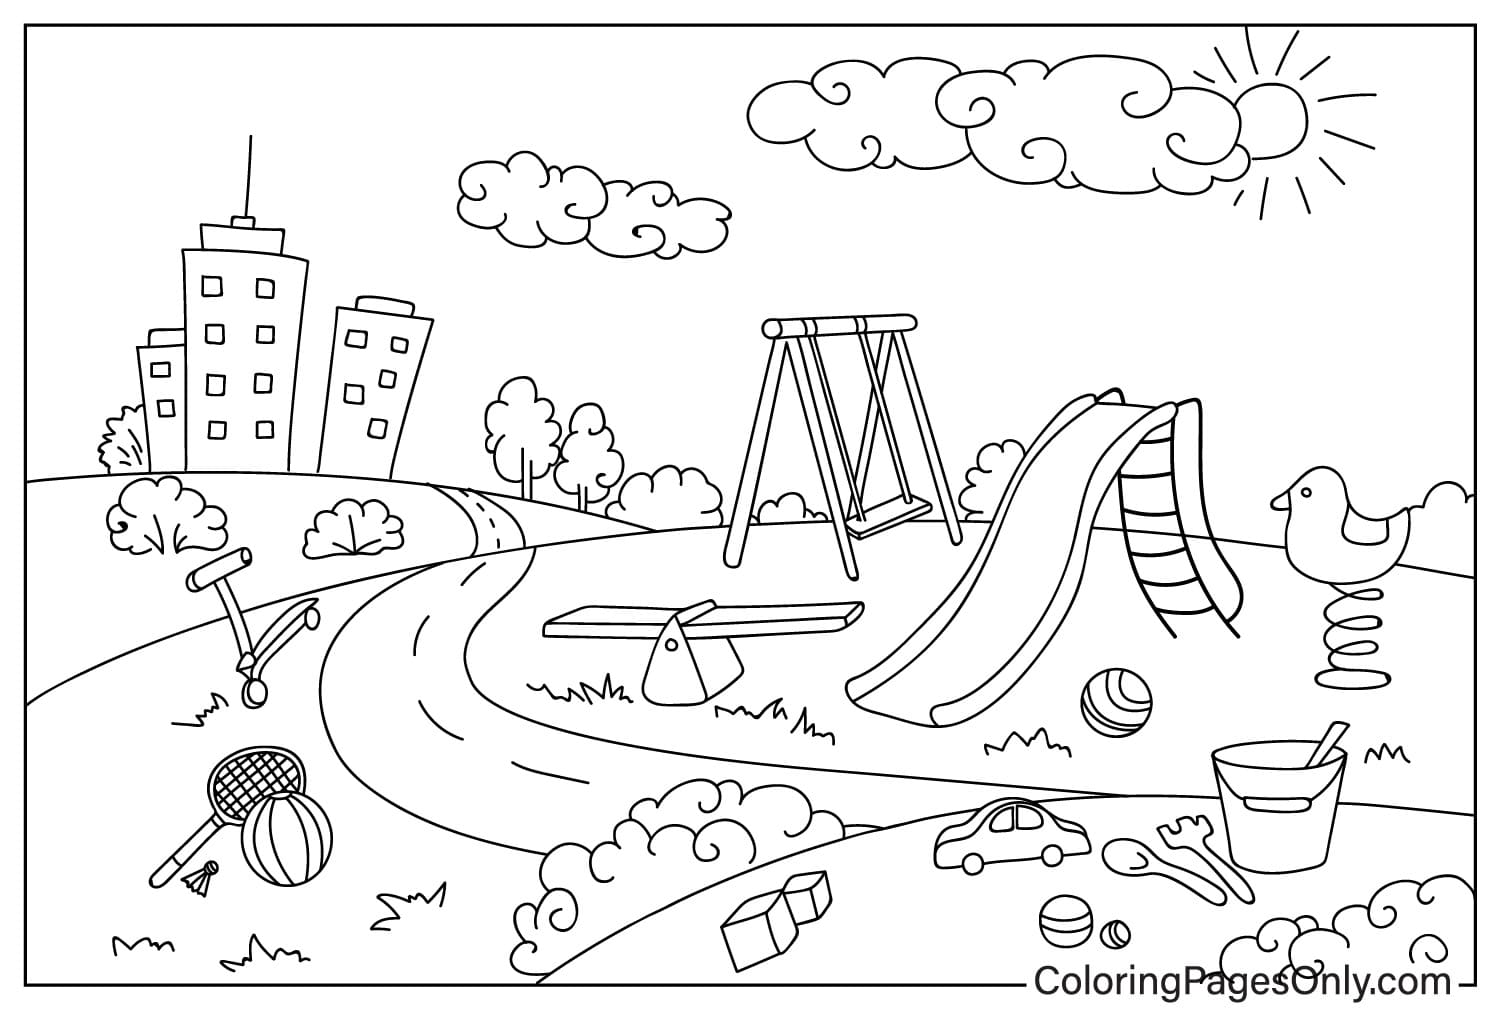 Playground Coloring Page Free Printable from Playground